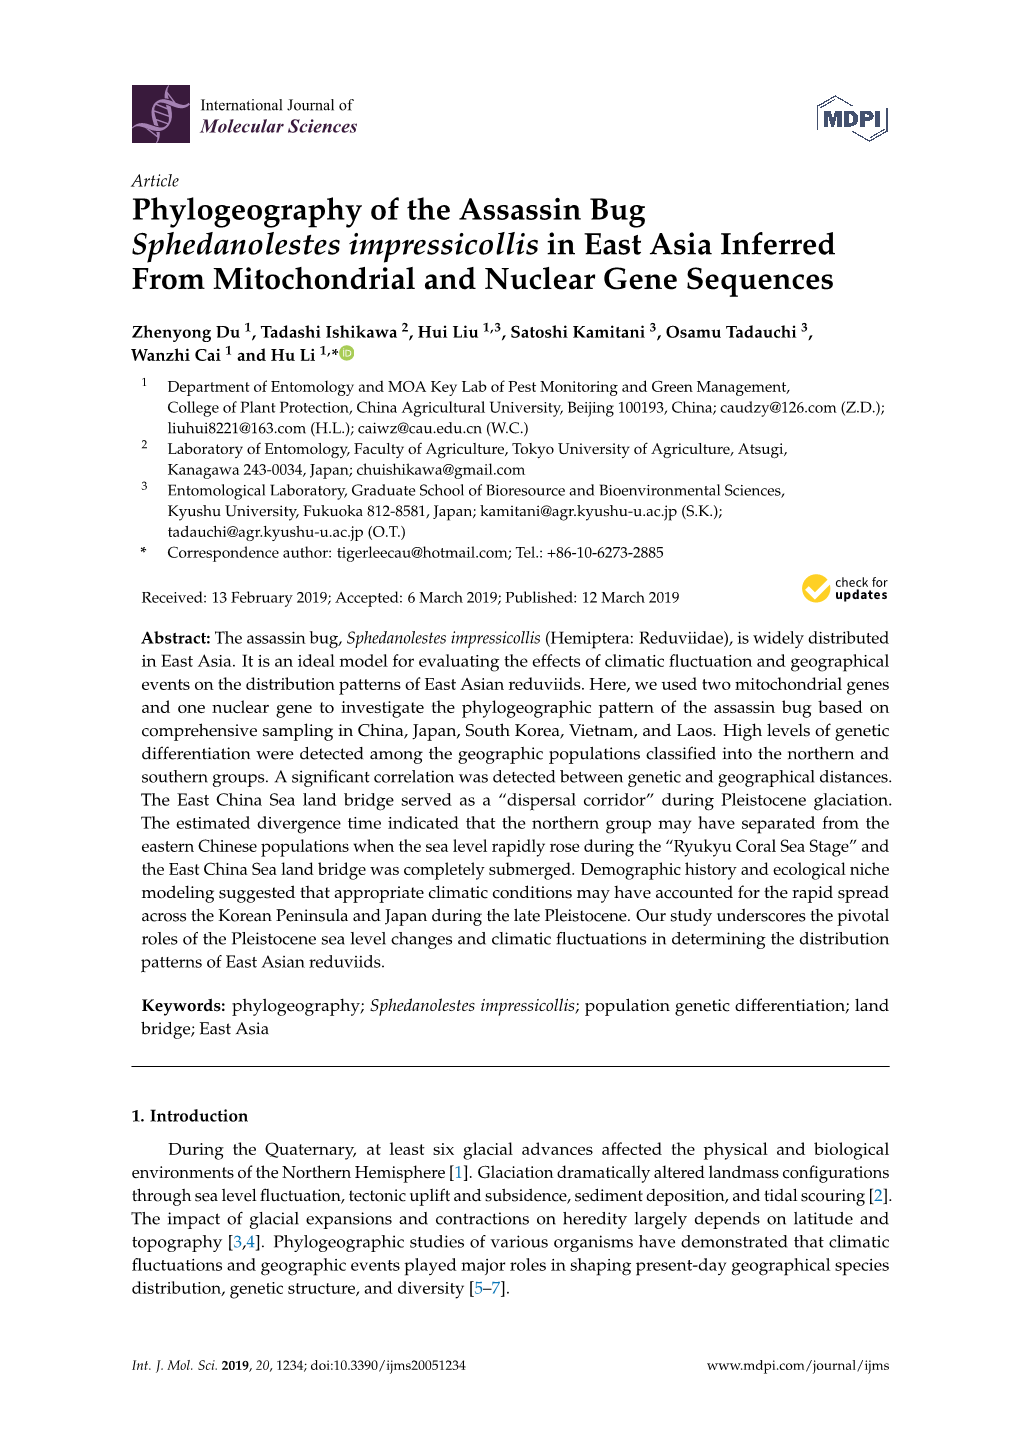 Phylogeography of the Assassin Bug Sphedanolestes Impressicollis in East Asia Inferred from Mitochondrial and Nuclear Gene Sequences